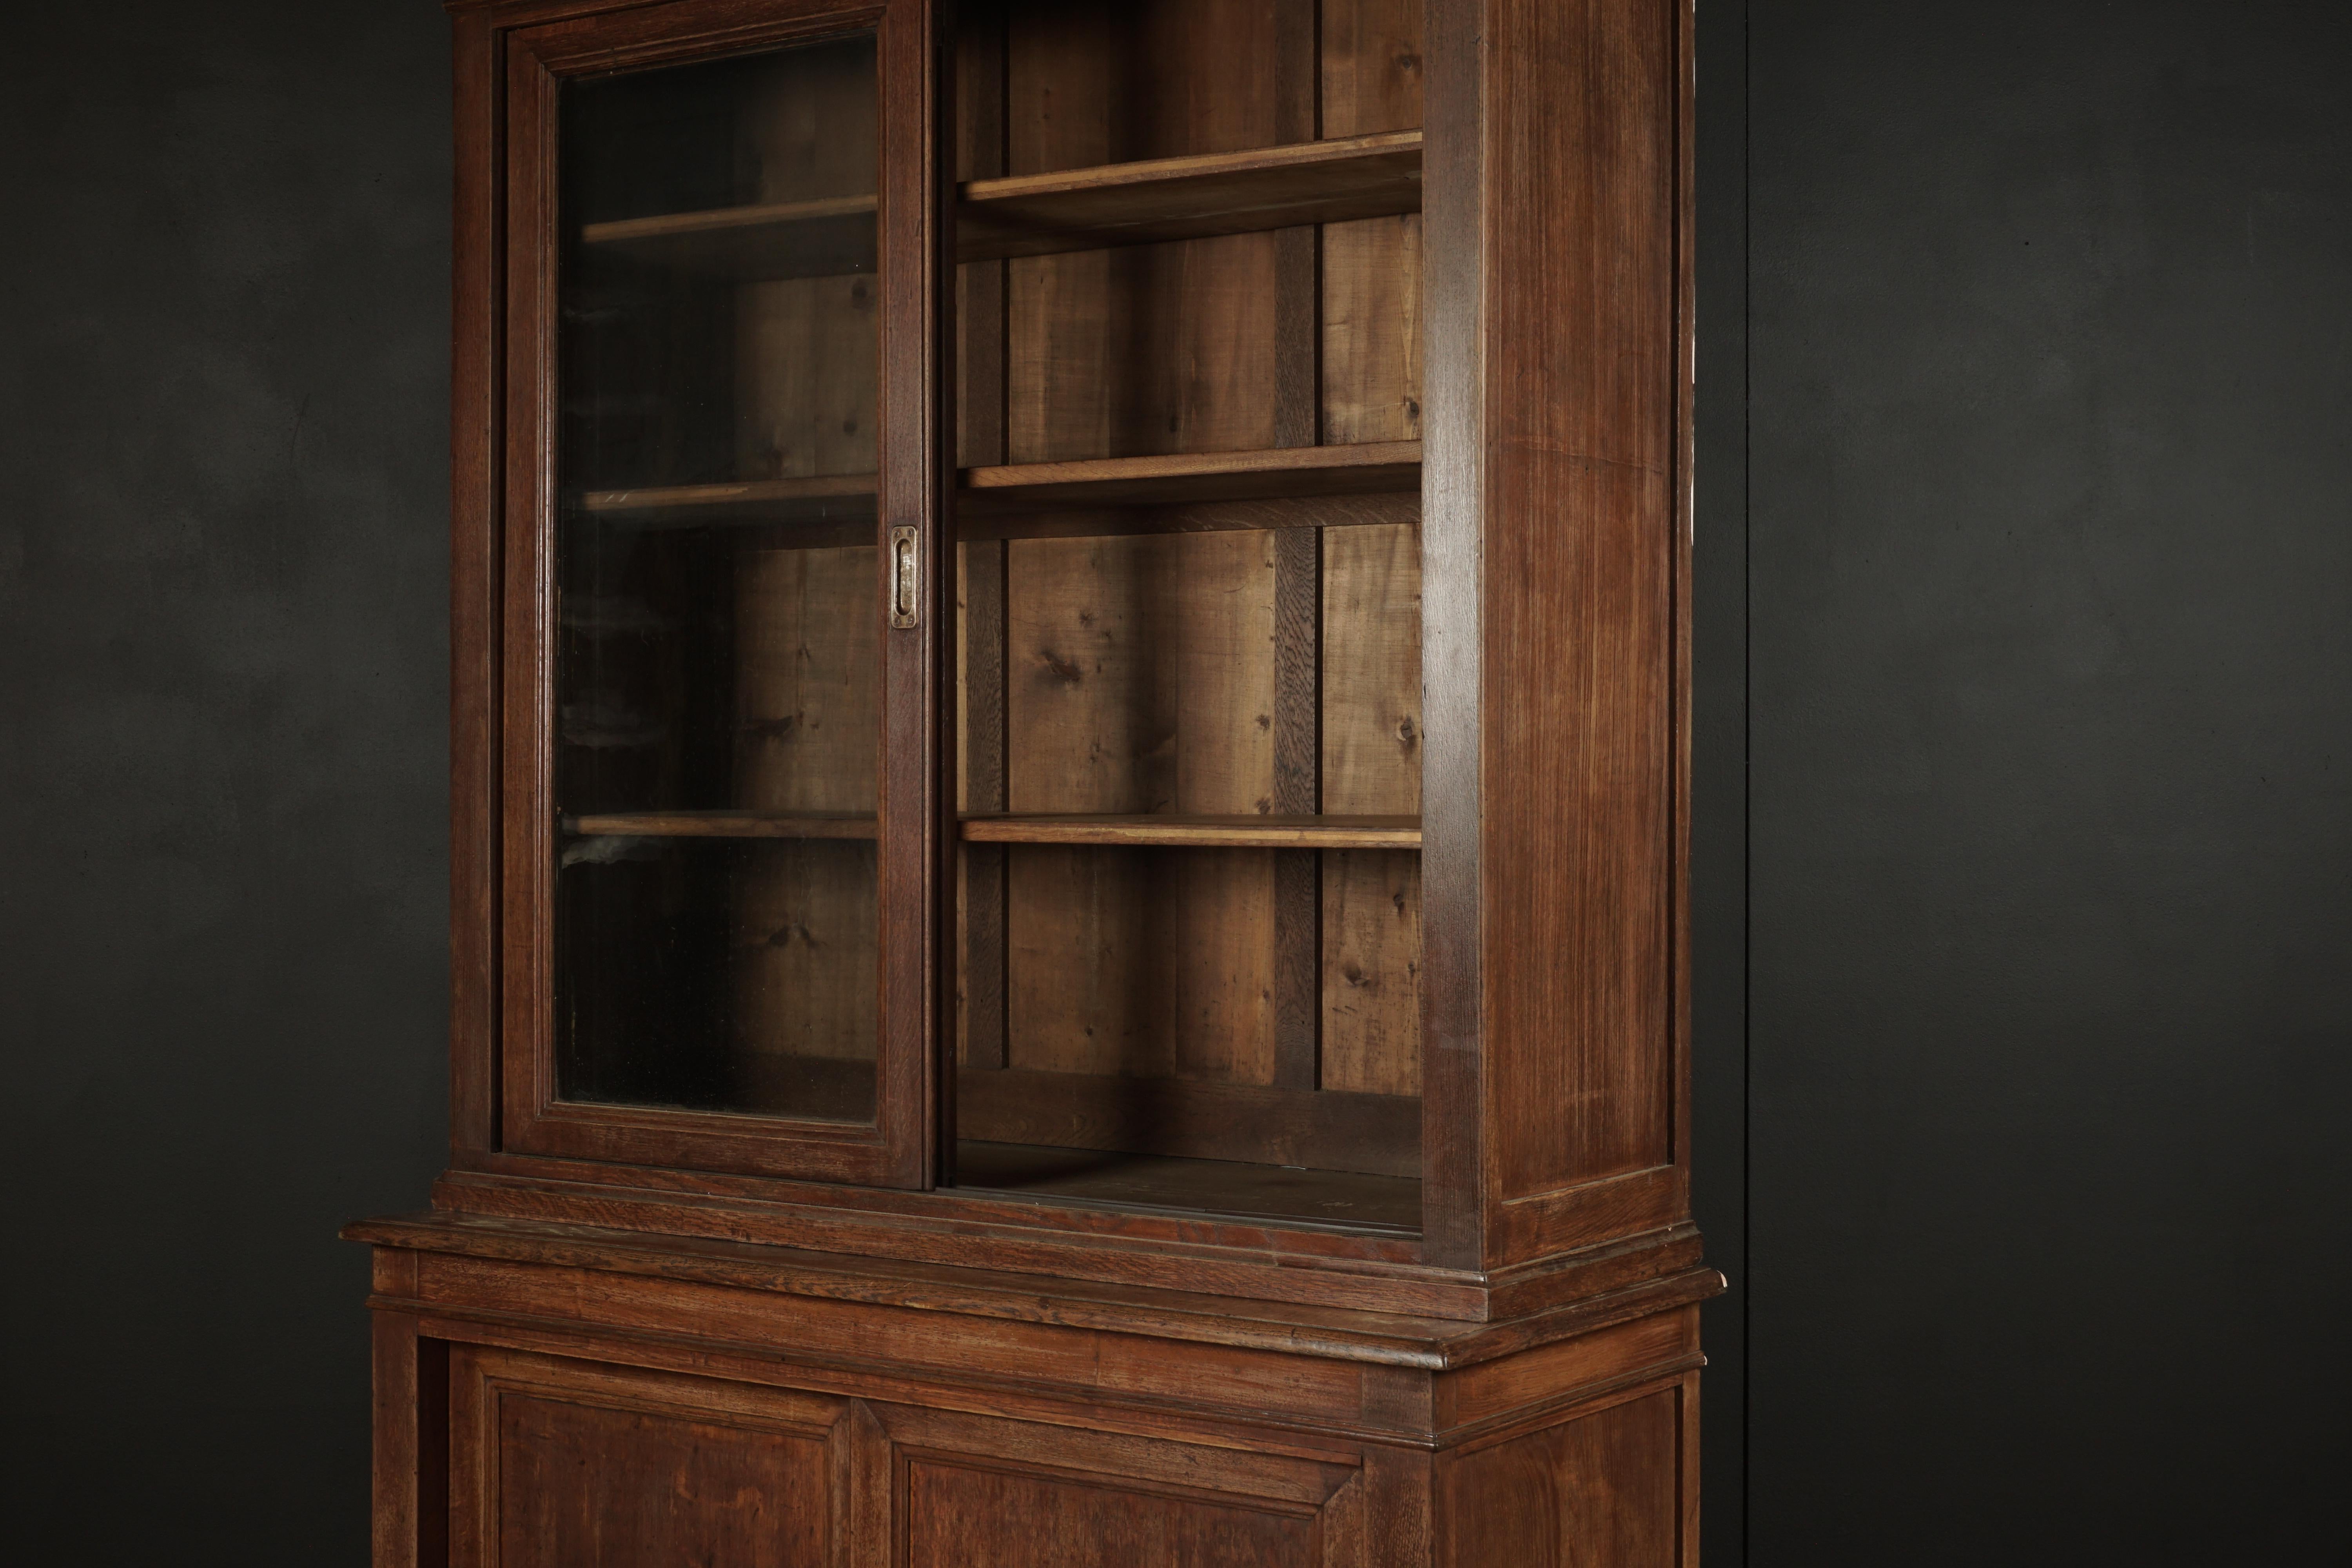 European Early French Oak Cabinet with Sliding Doors, circa 1920